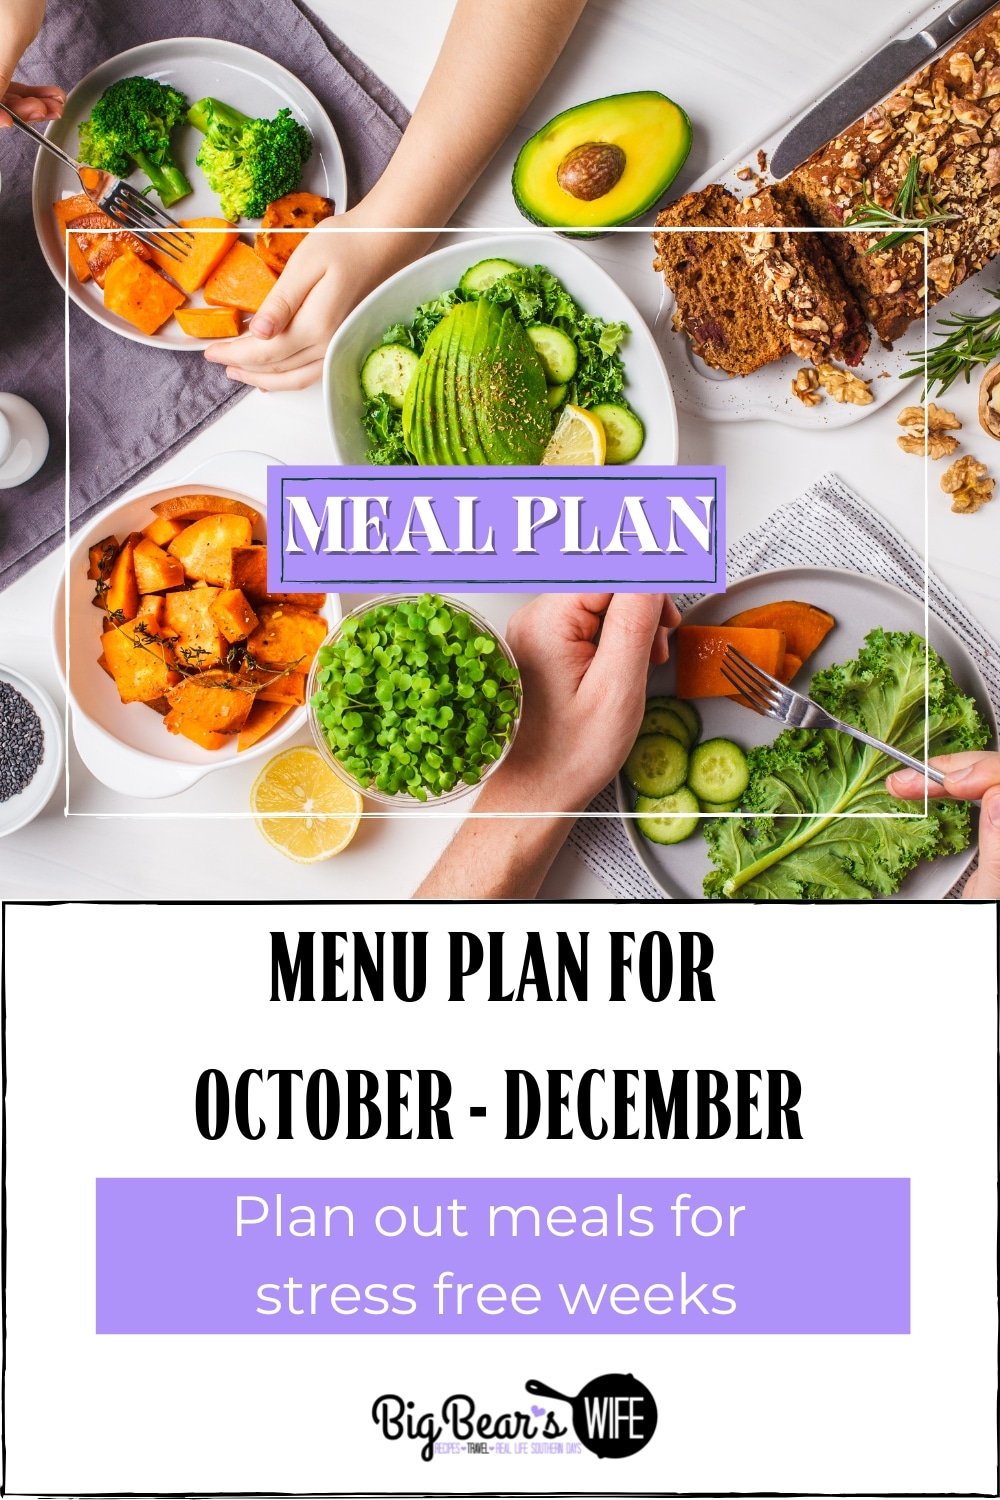 Trying to figure out what to make for dinner? I've got some meal ideas for the end of the year, October - December! Use these recipes or maybe just use them as ideas to plan out your meals for the upcoming weeks or months! via @bigbearswife